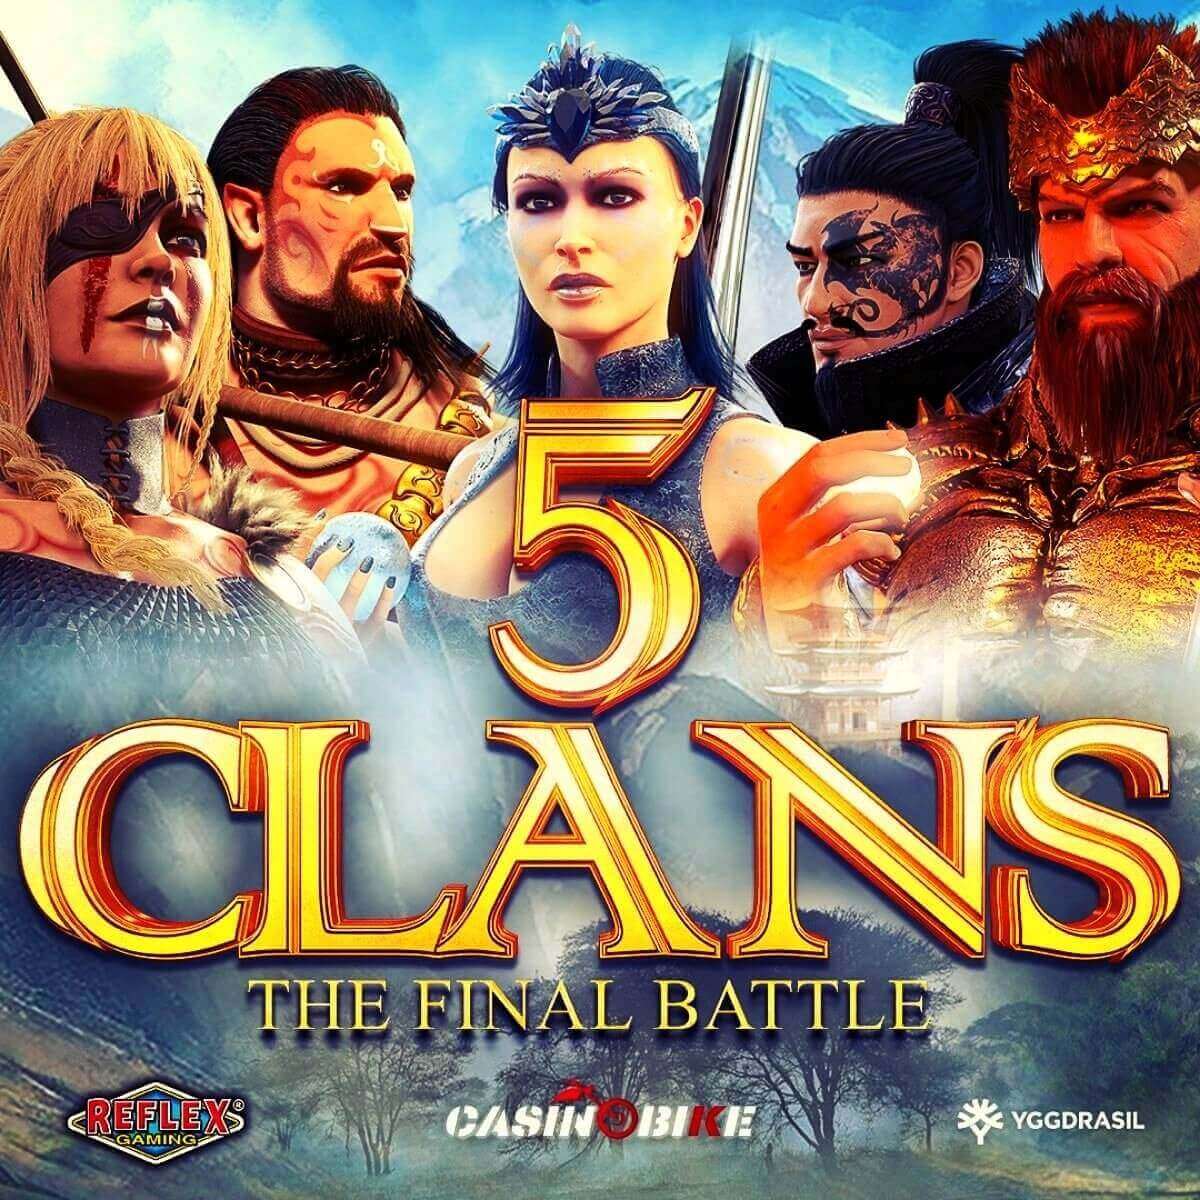 5 Clans The Final Battle Slot from Reflex Gaming